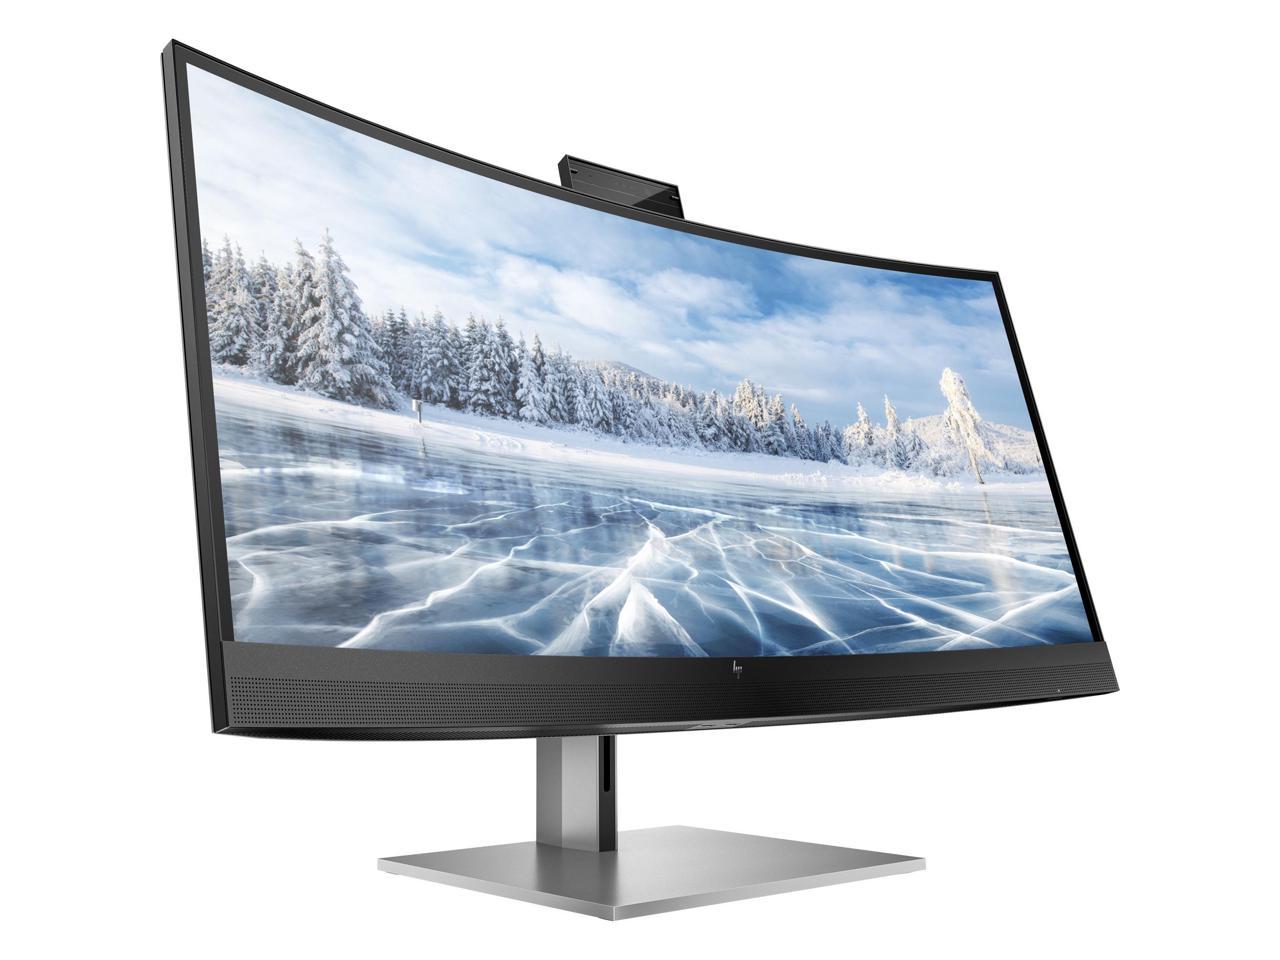 HP Z34c G3 30A19AA#ABA 34" WQHD 3440 x 1440 (2K) 60 Hz HDMI, DisplayPort, USB, RJ-45 Curved IPS Monitor - image 4 of 5